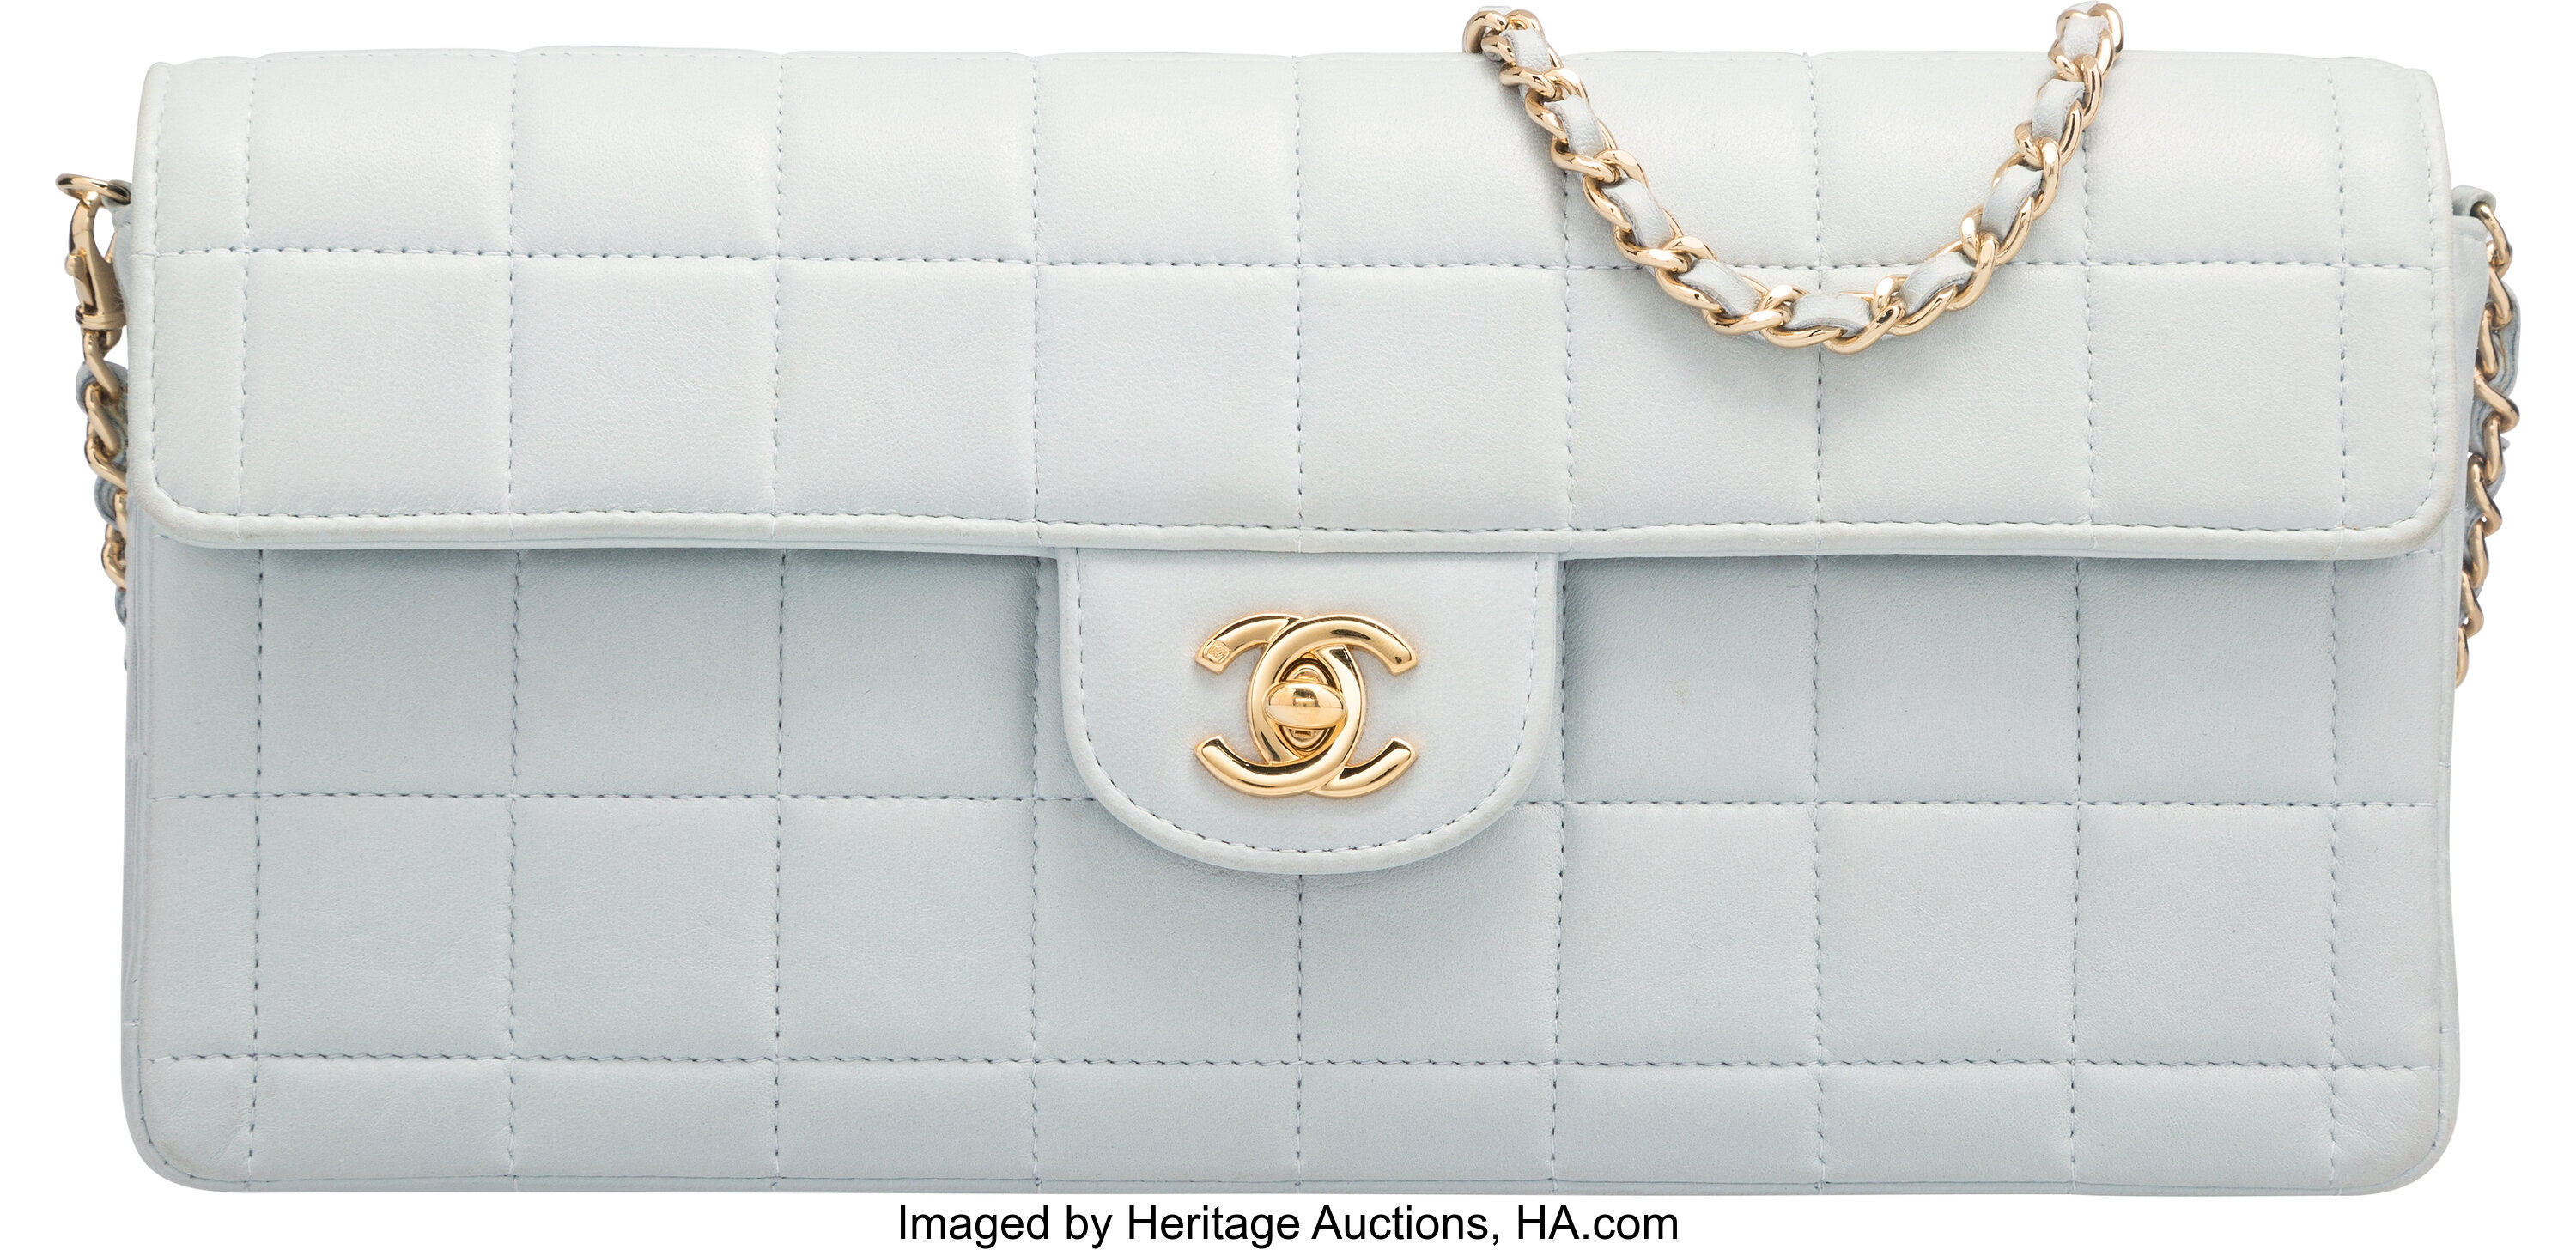 Chanel Quilted Cc Mini Square Hand Bag Gold Lambskin France Purse